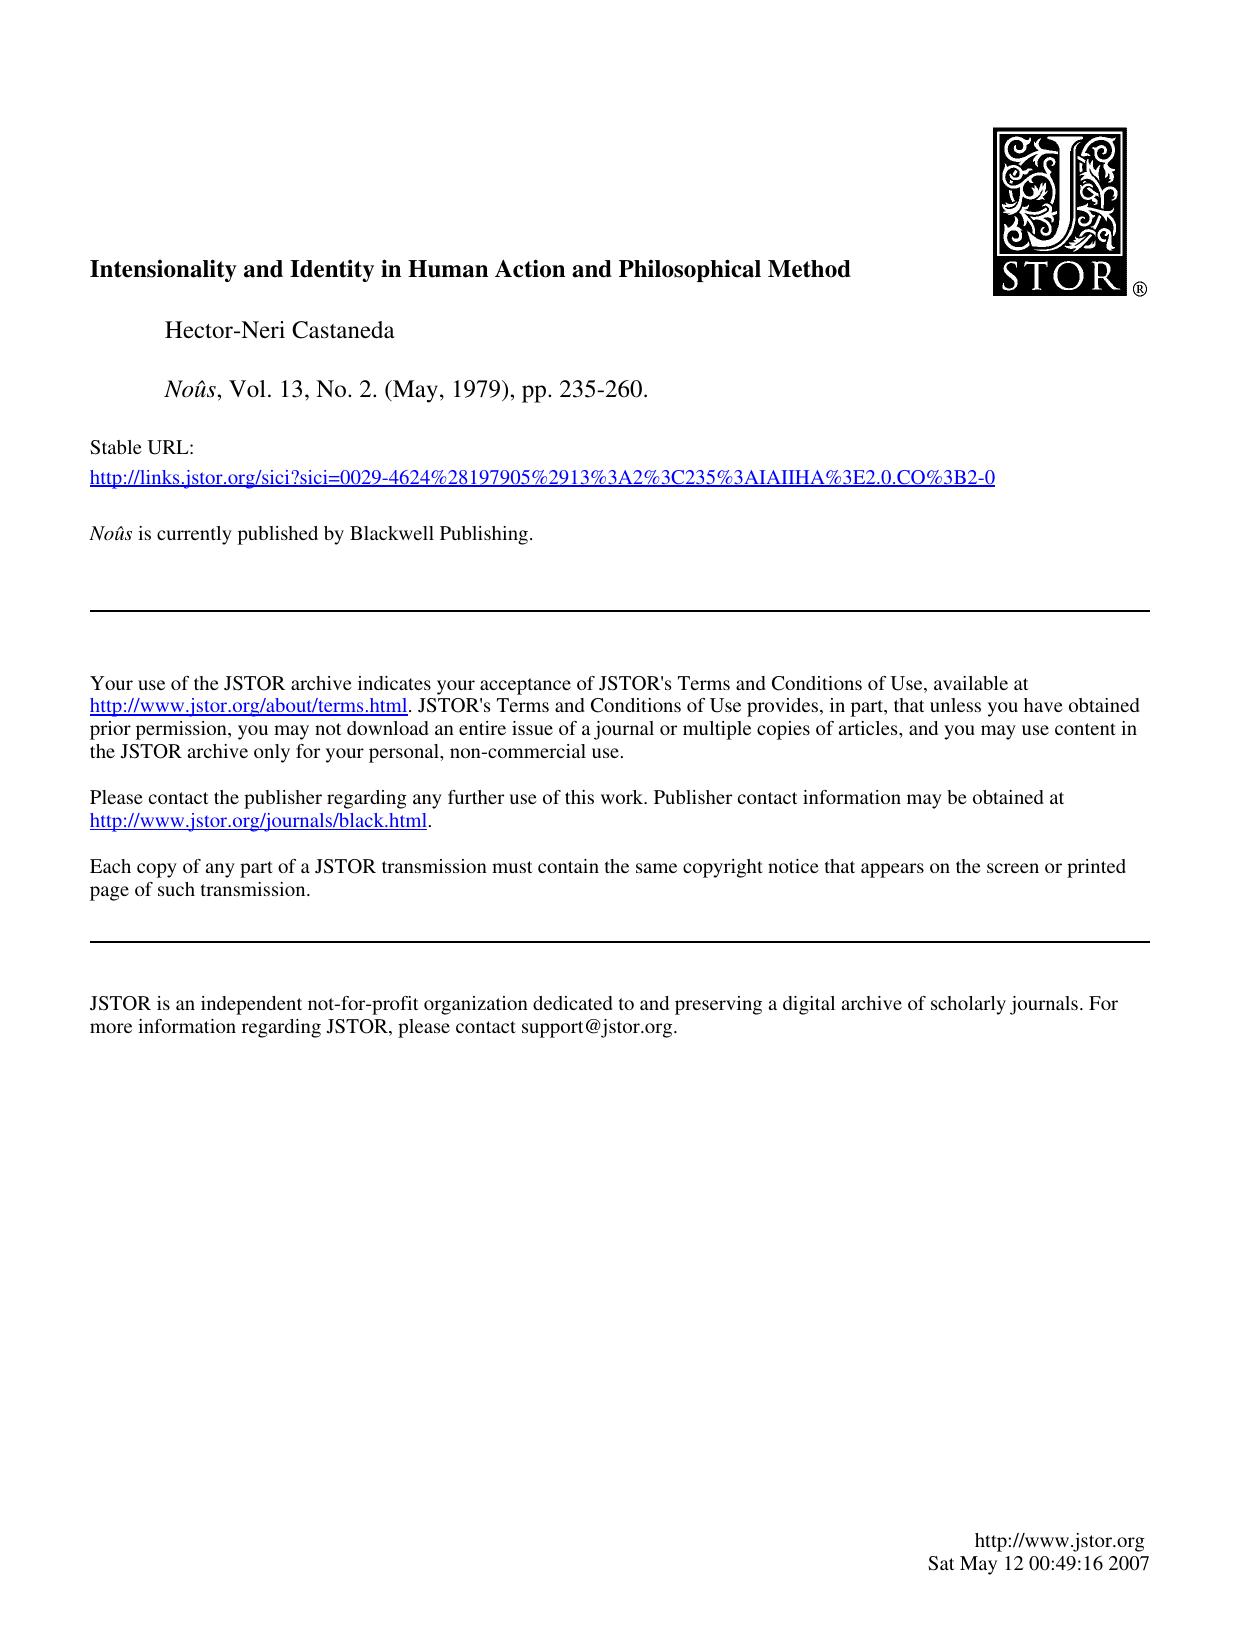 Intensionality and Identity in Human Action and Philosophical Method - Paper